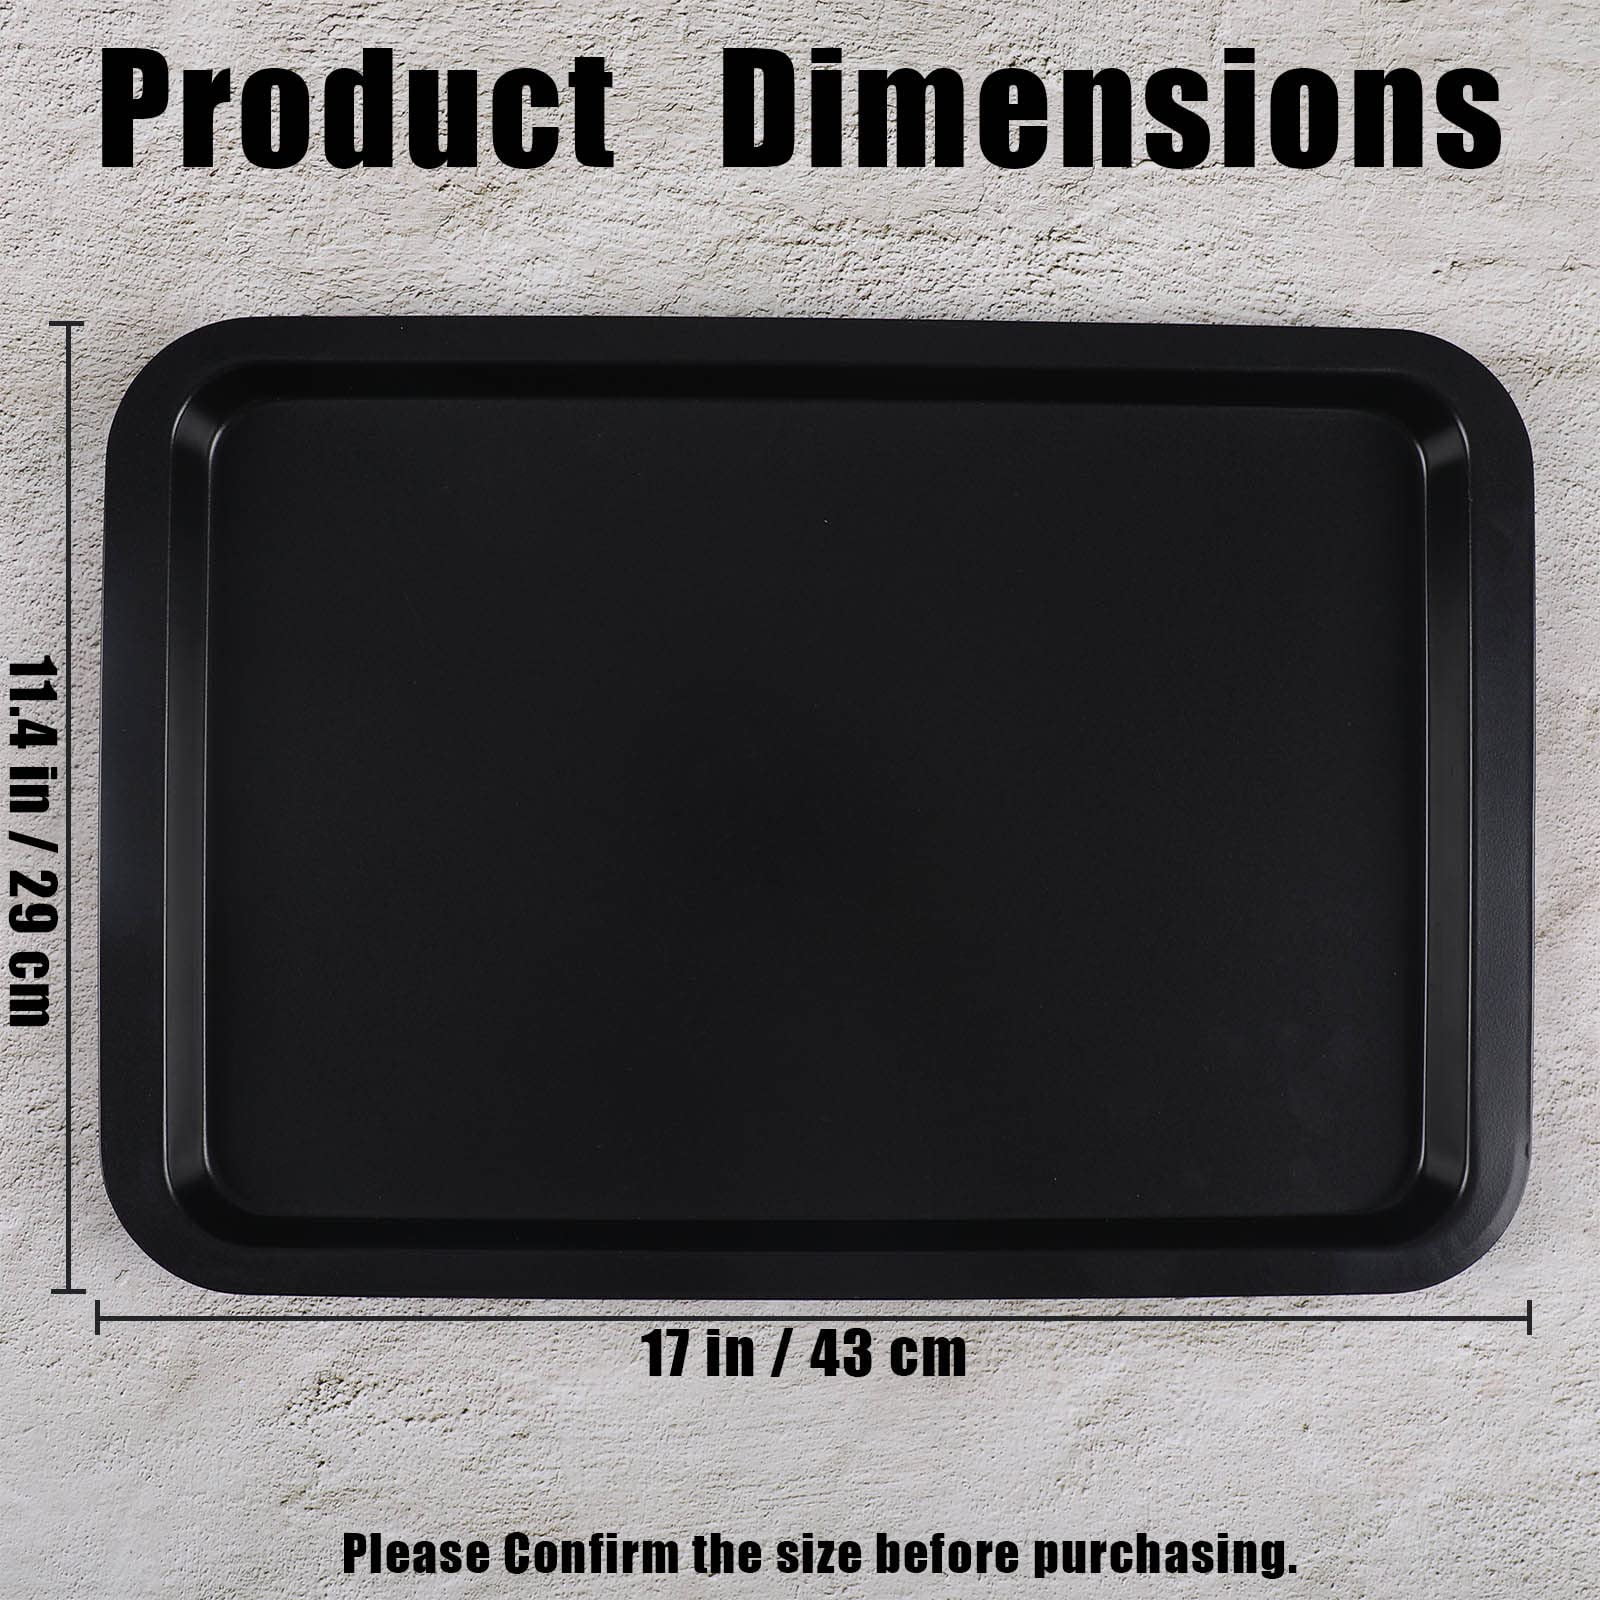 12.7-Inch Nonstick Baking Sheets & Cookie Trays for Oven, 2-Pack PFOA Free  Baking Pans Set (Black)